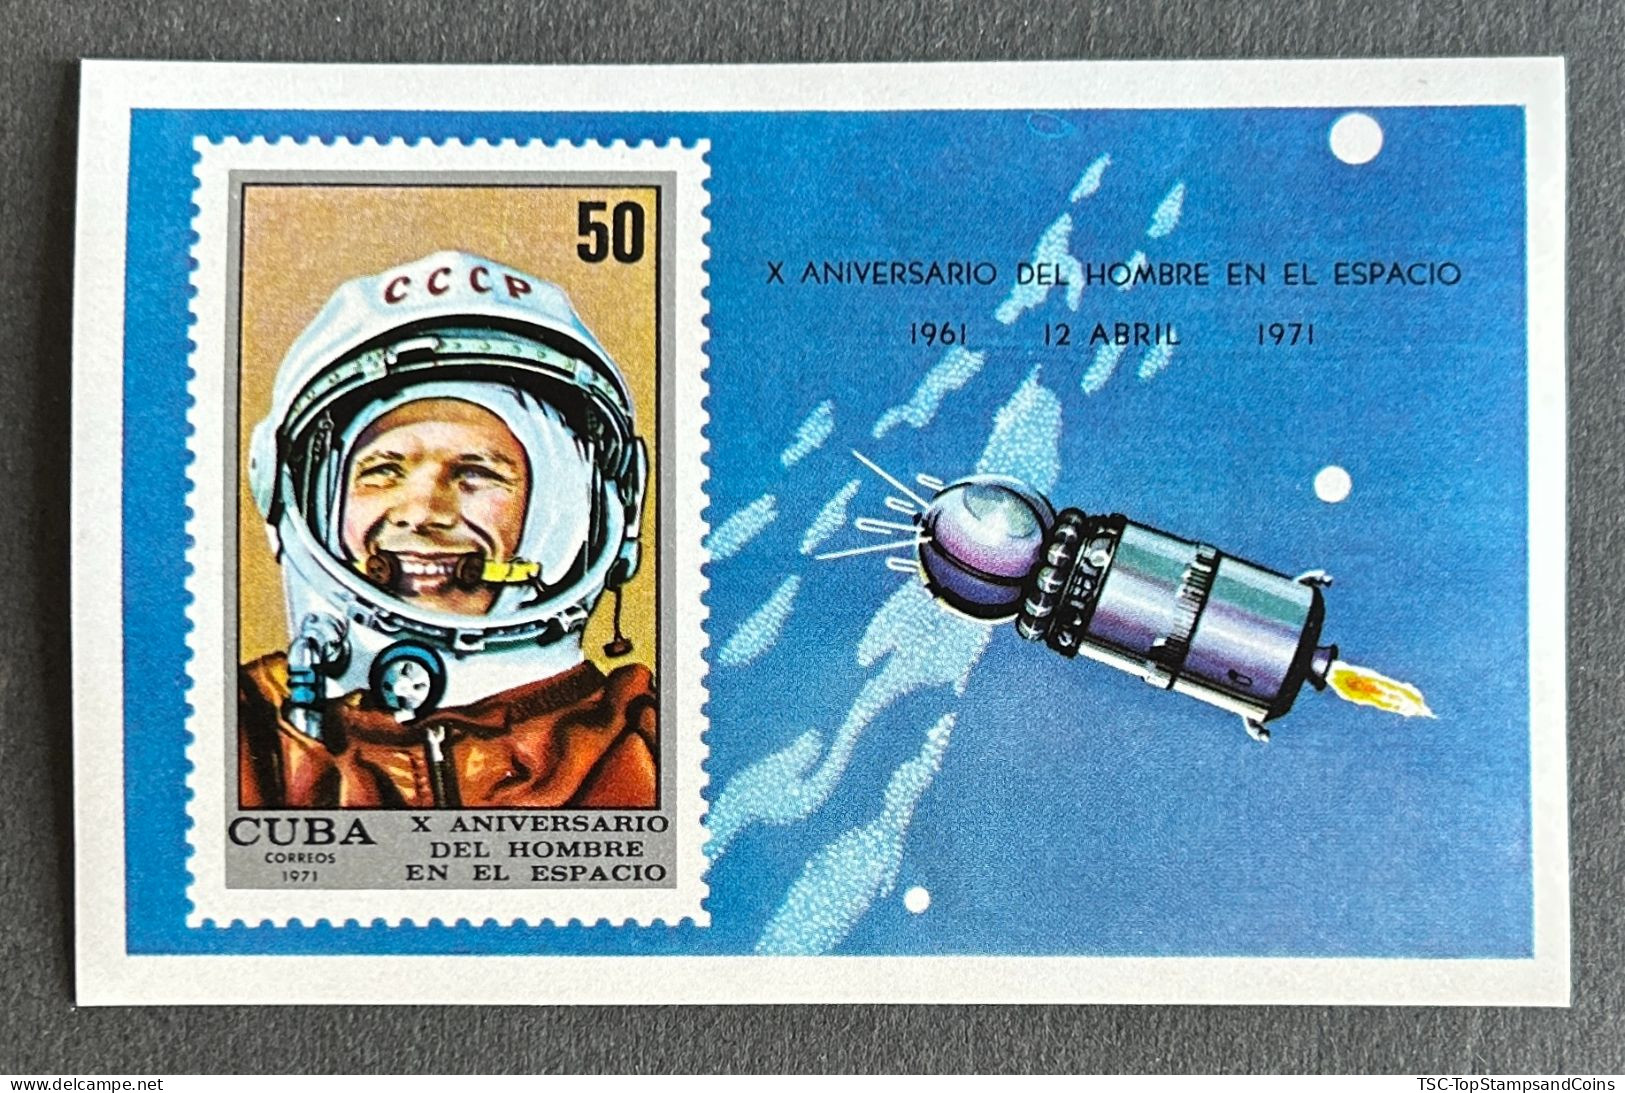 CUBBF36MNH - Manned Space Flight 10th Anniversary - BS 36 MNH - Cuba - 1971 - Hojas Y Bloques